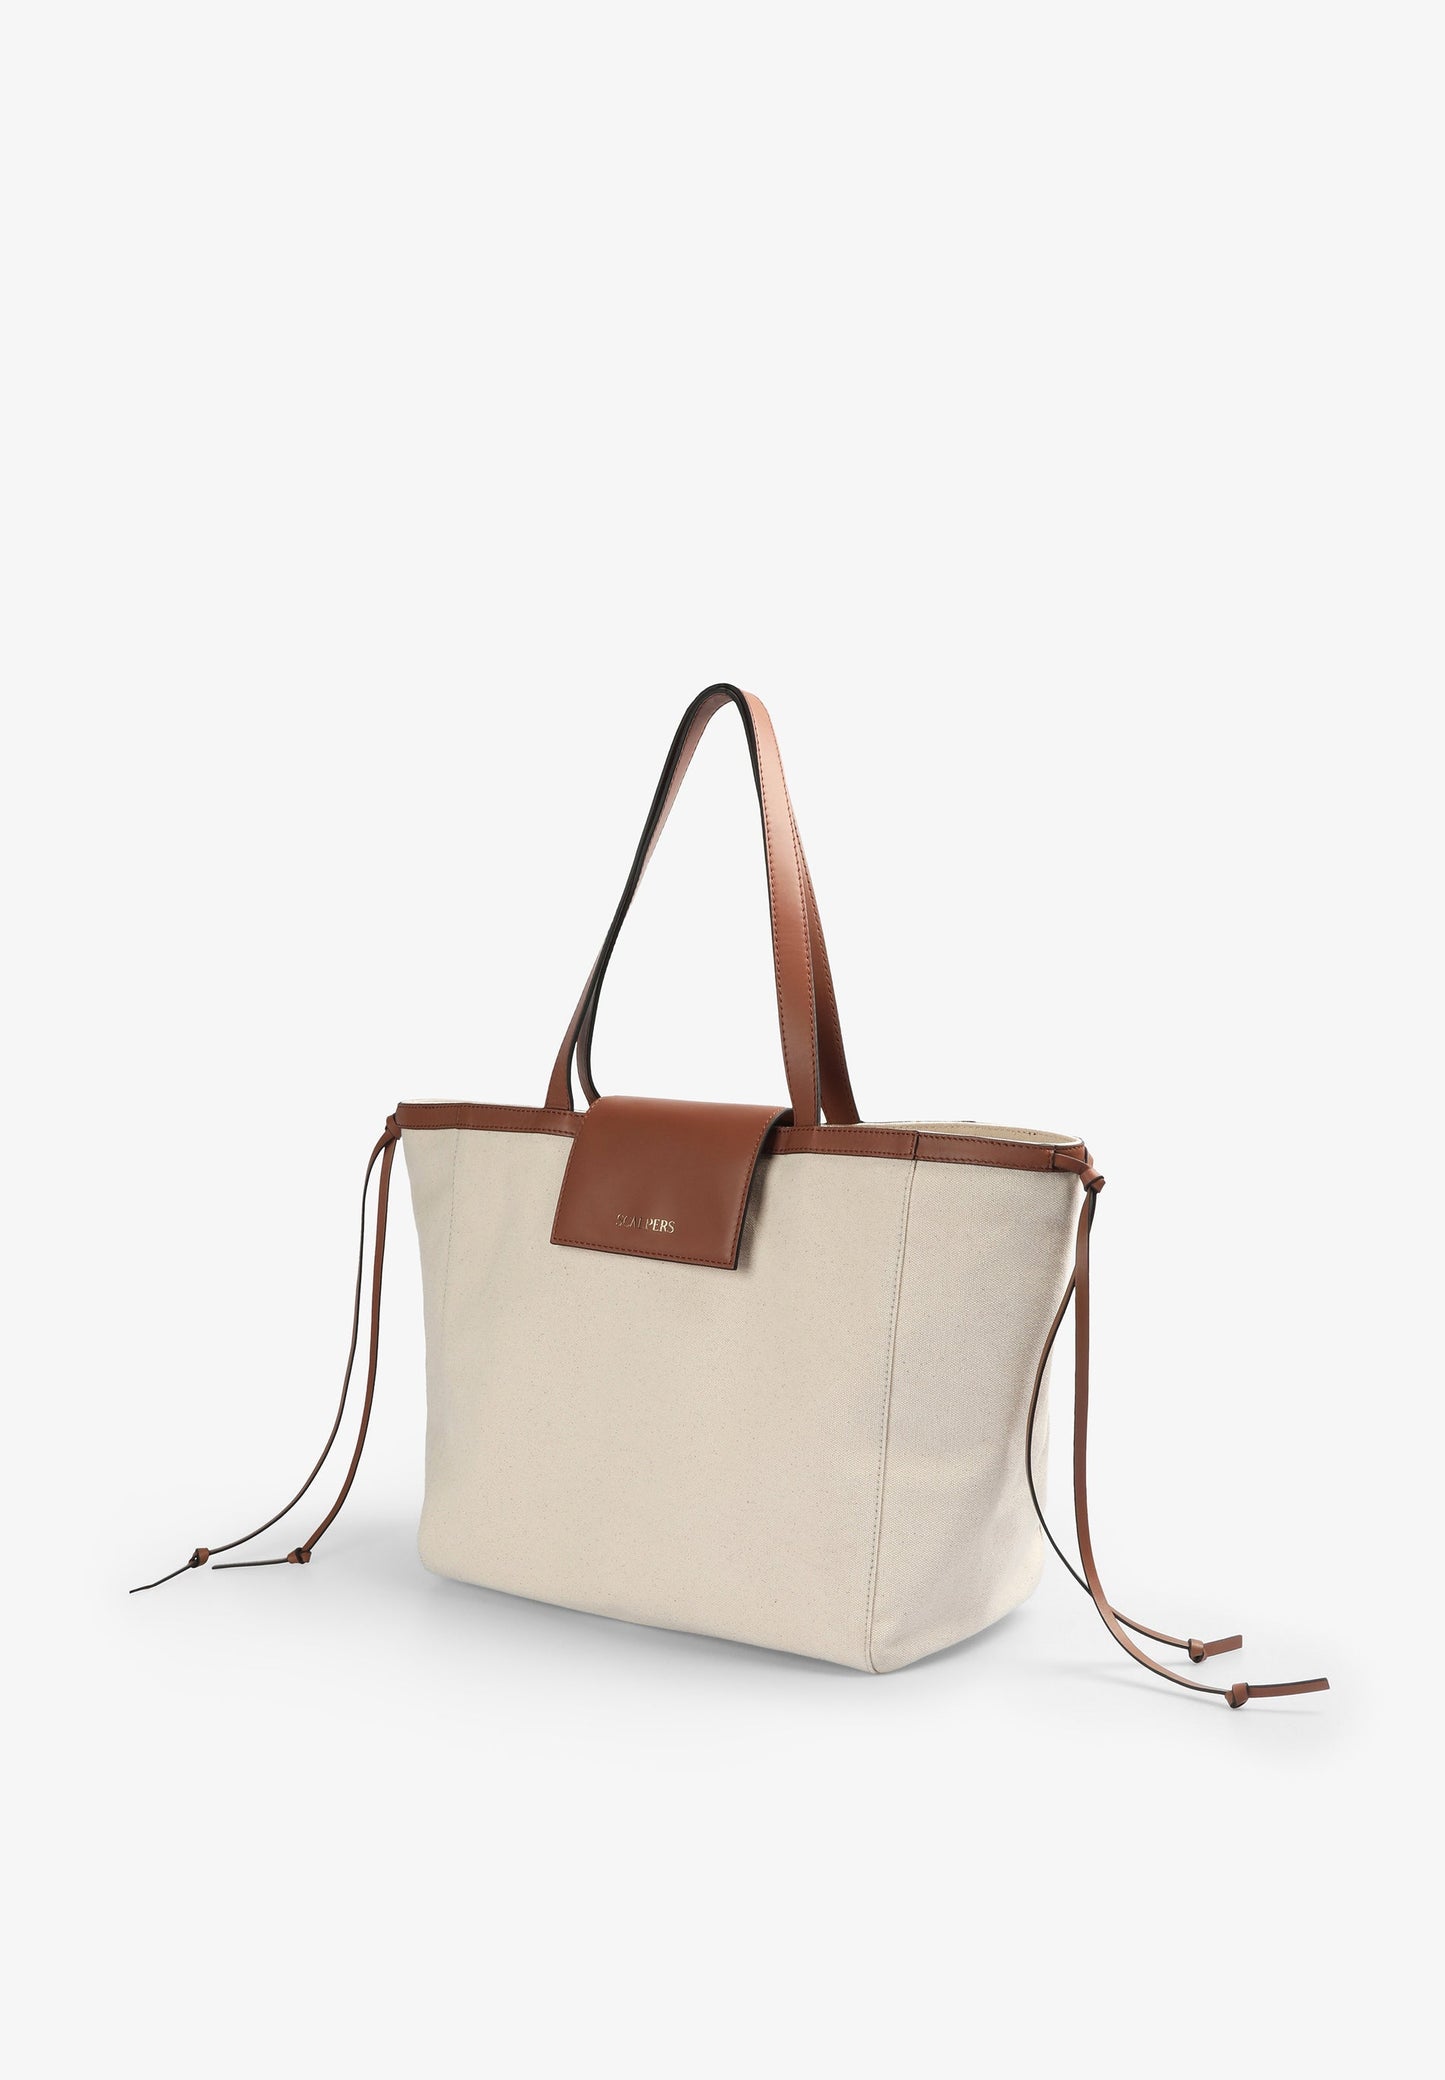 CANVAS TOTE BAG WITH LEATHER DETAILS